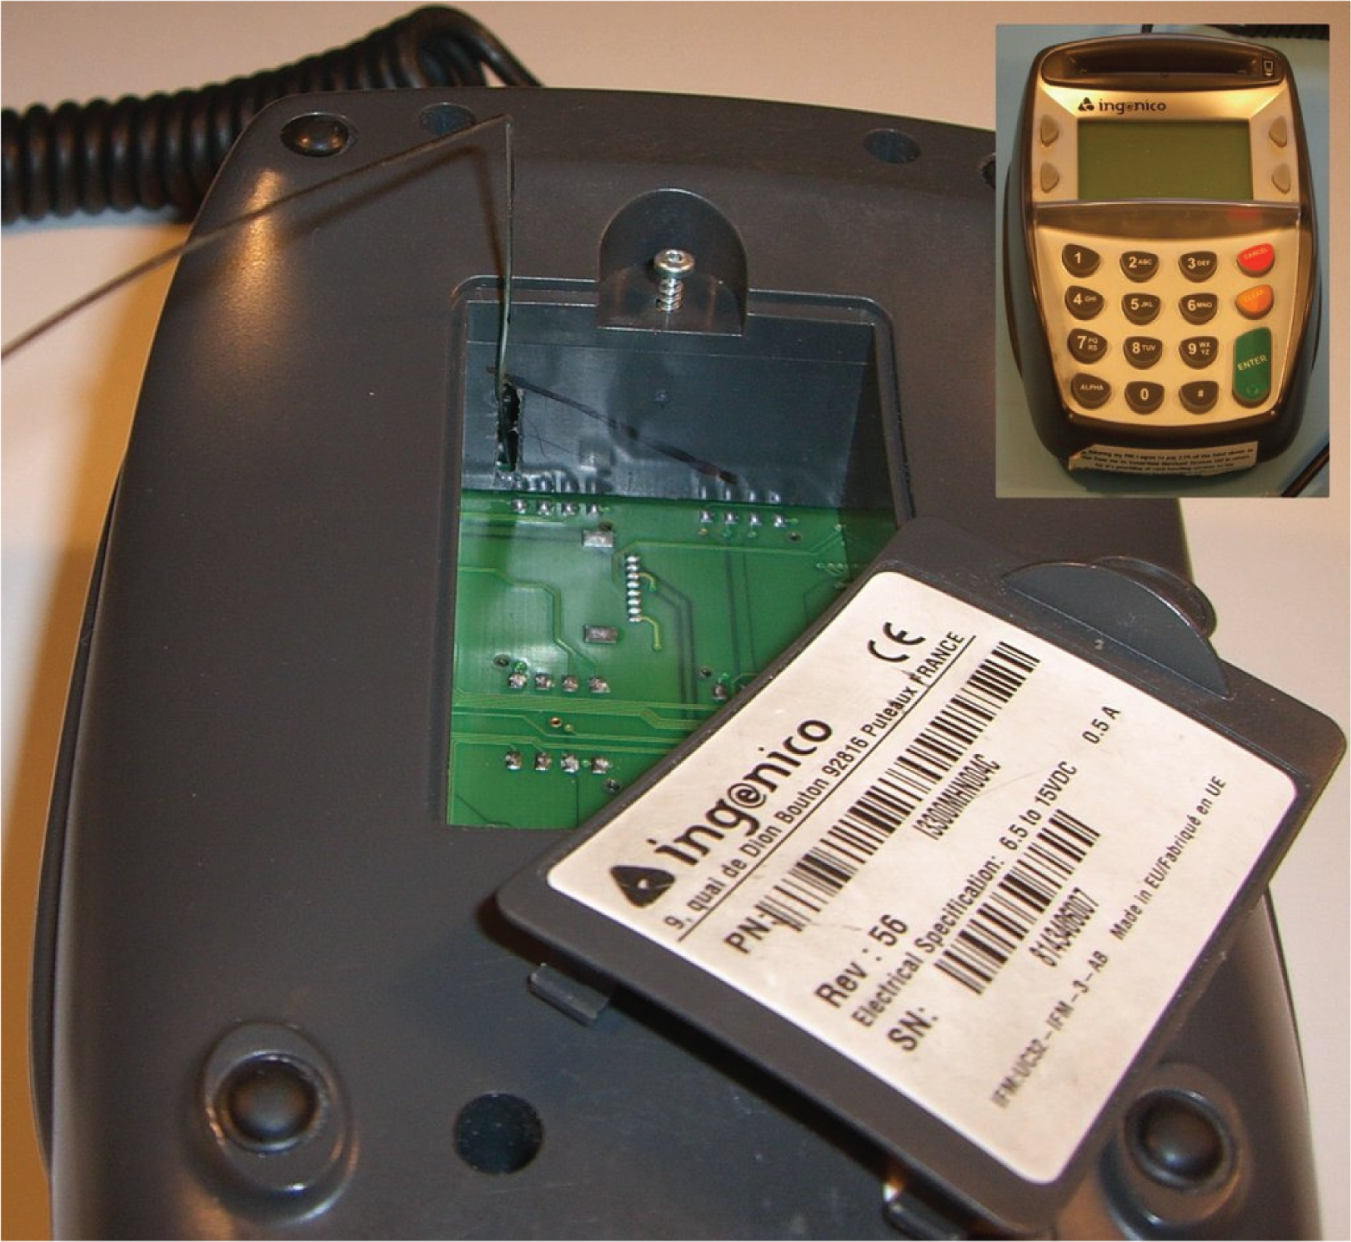 Photo depicts a rigid wire is inserted through a hole in the Ingenico’s concealed compartment wall to intercept the smartcard data. The front of the device is shown on the top right.